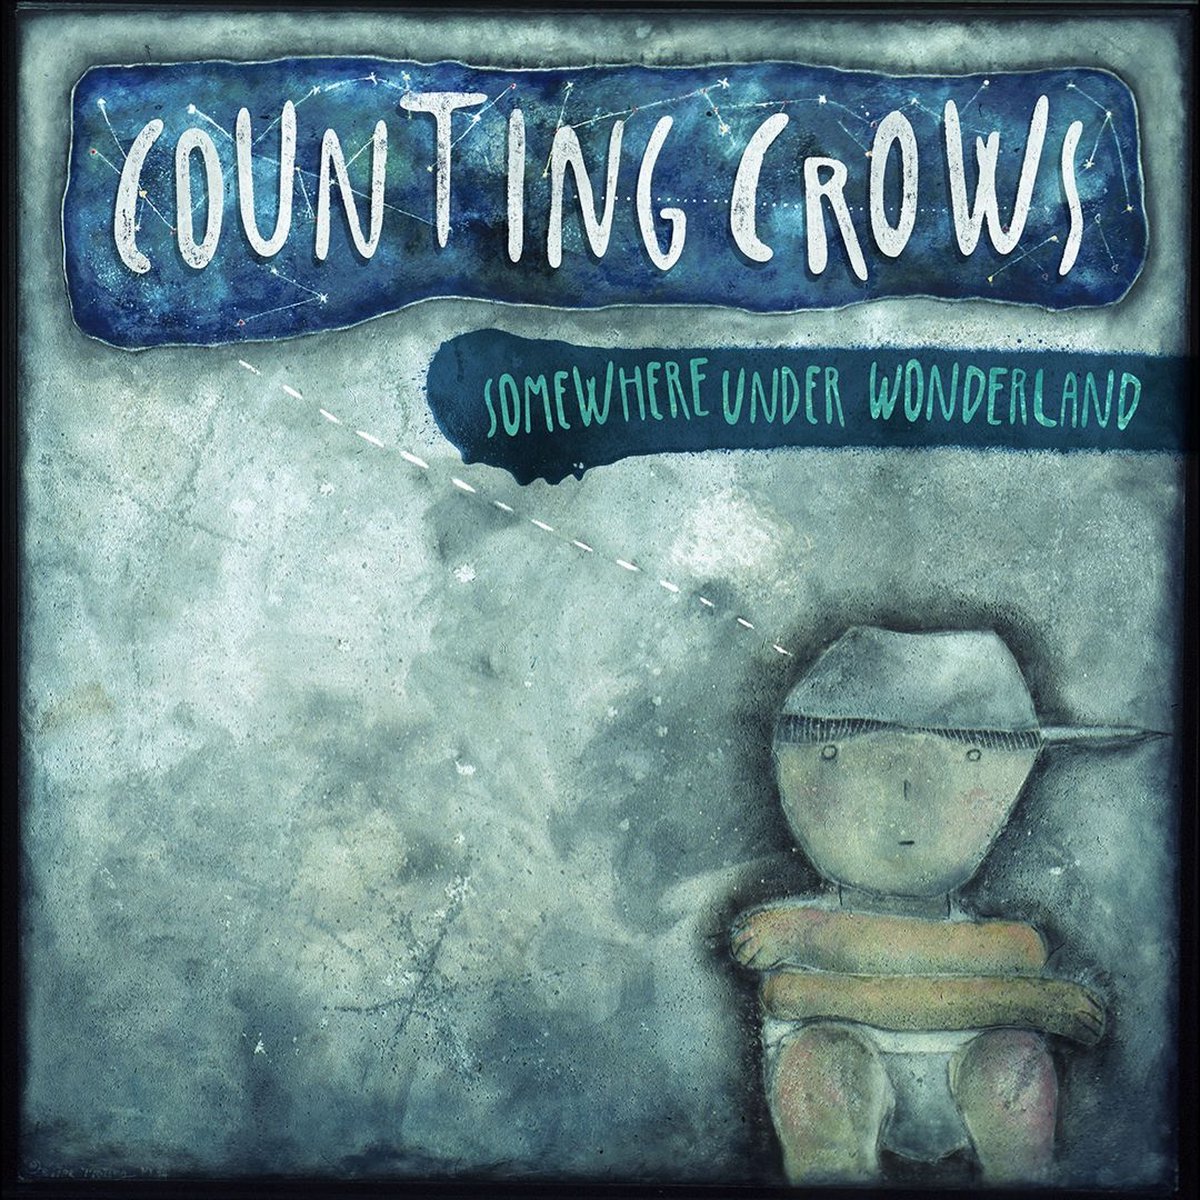 Somewhere Under Wonderland (Deluxe Edition) - Counting Crows